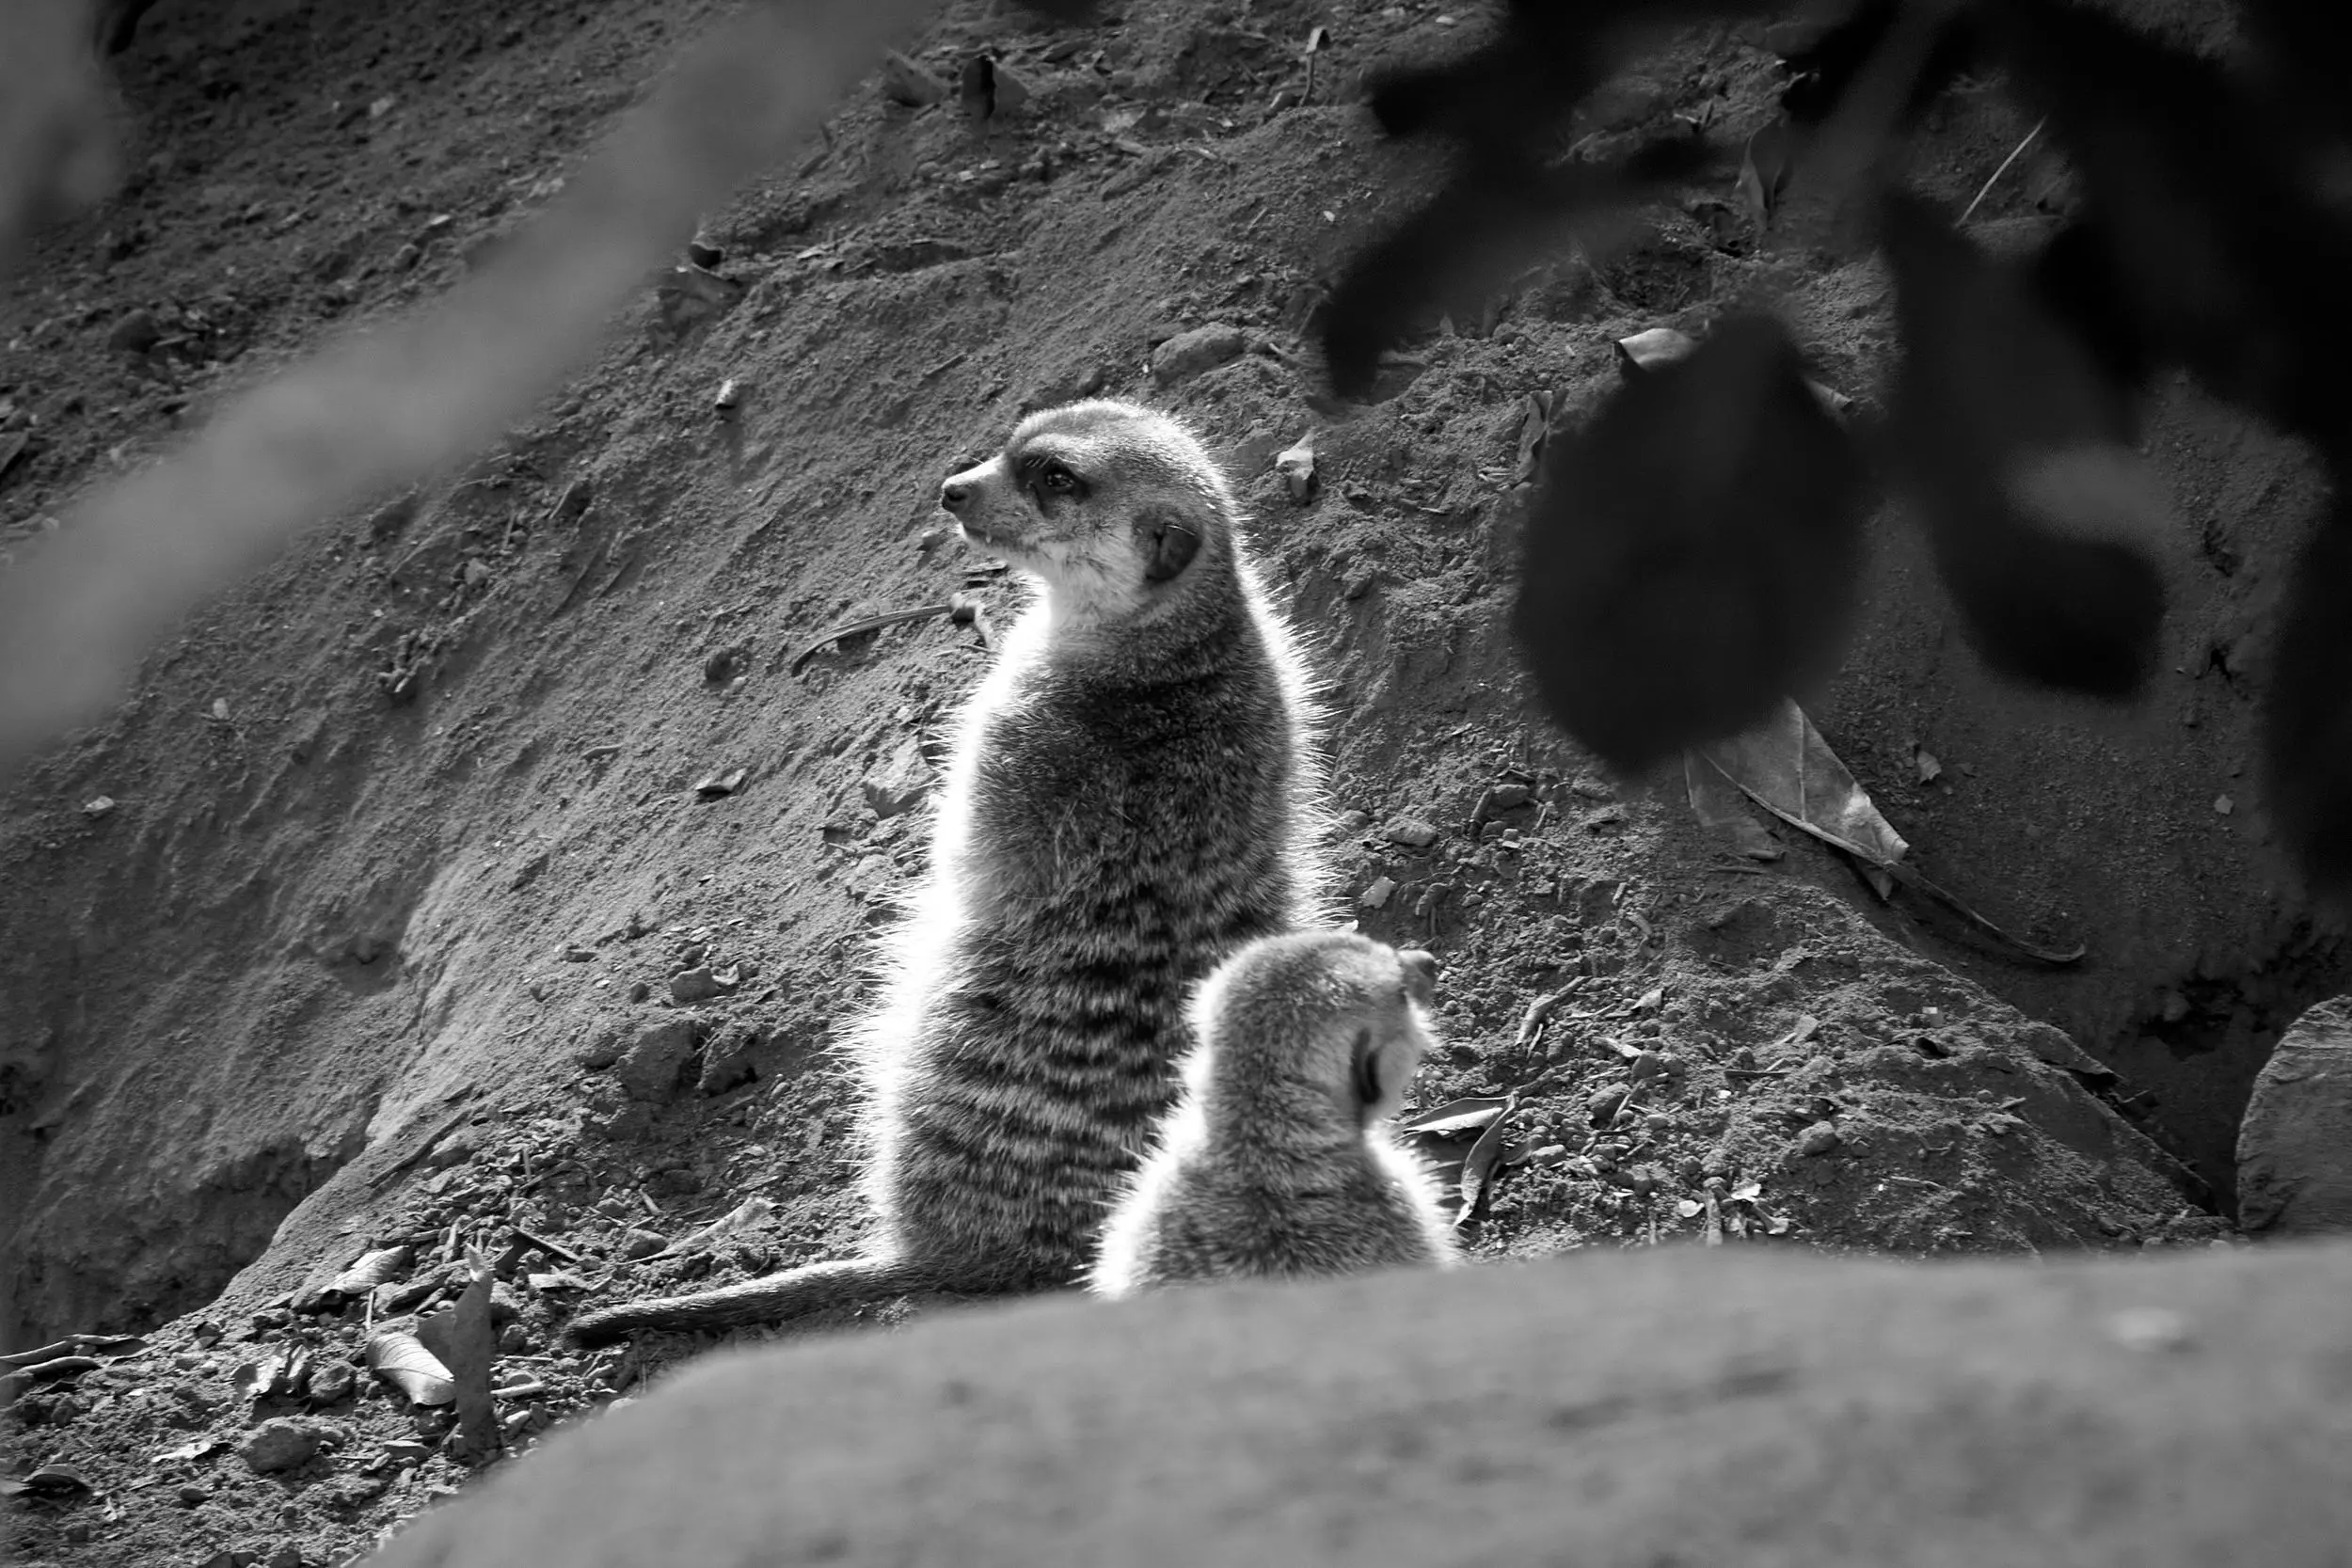 Two meerkats stand upright and look off in each direction while backlit by the sun.